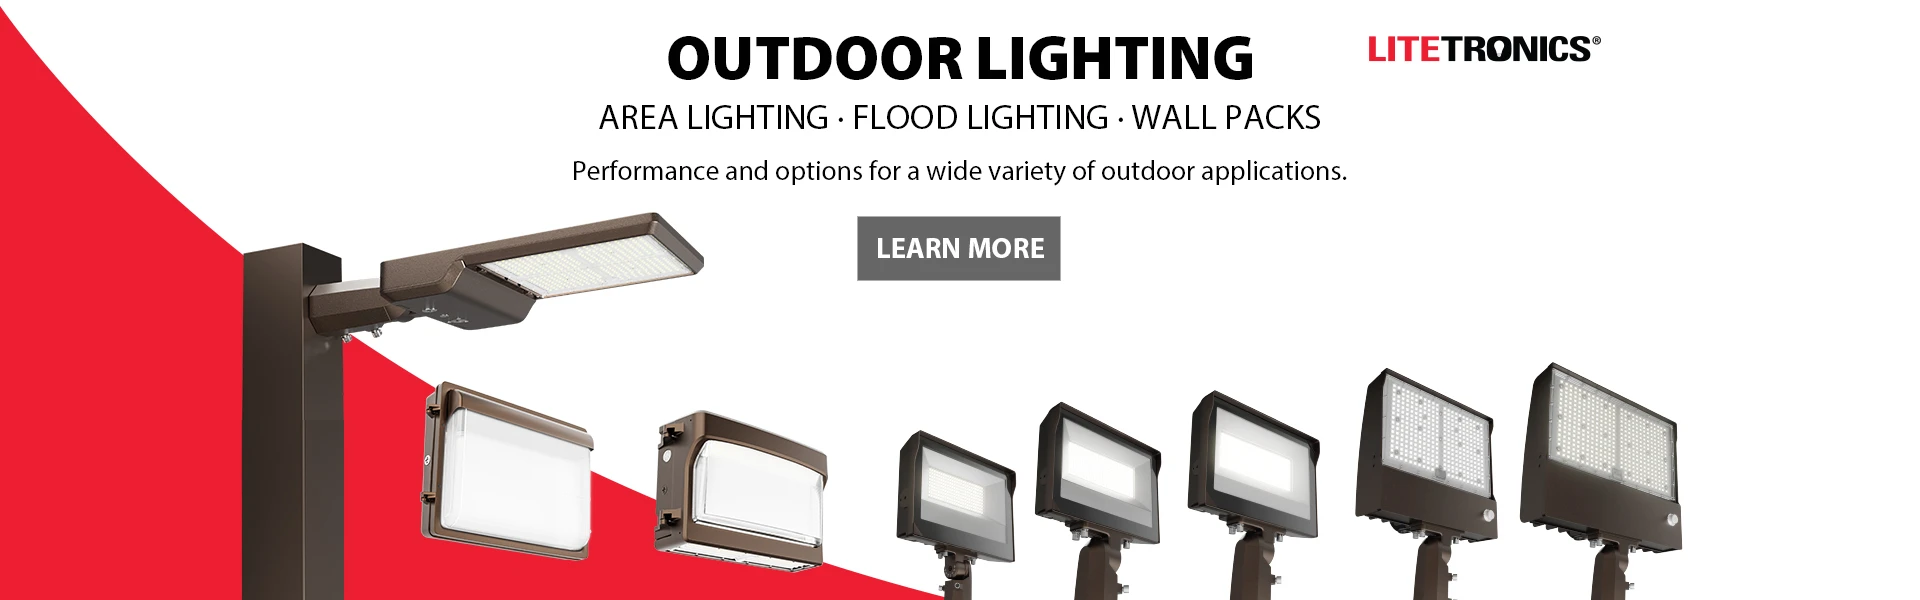 Litetronics - Outdoor Lighting. Area Lighting. Flood Lighting. Wall Packs. Performance and options for a wide variety of outdoor applications.